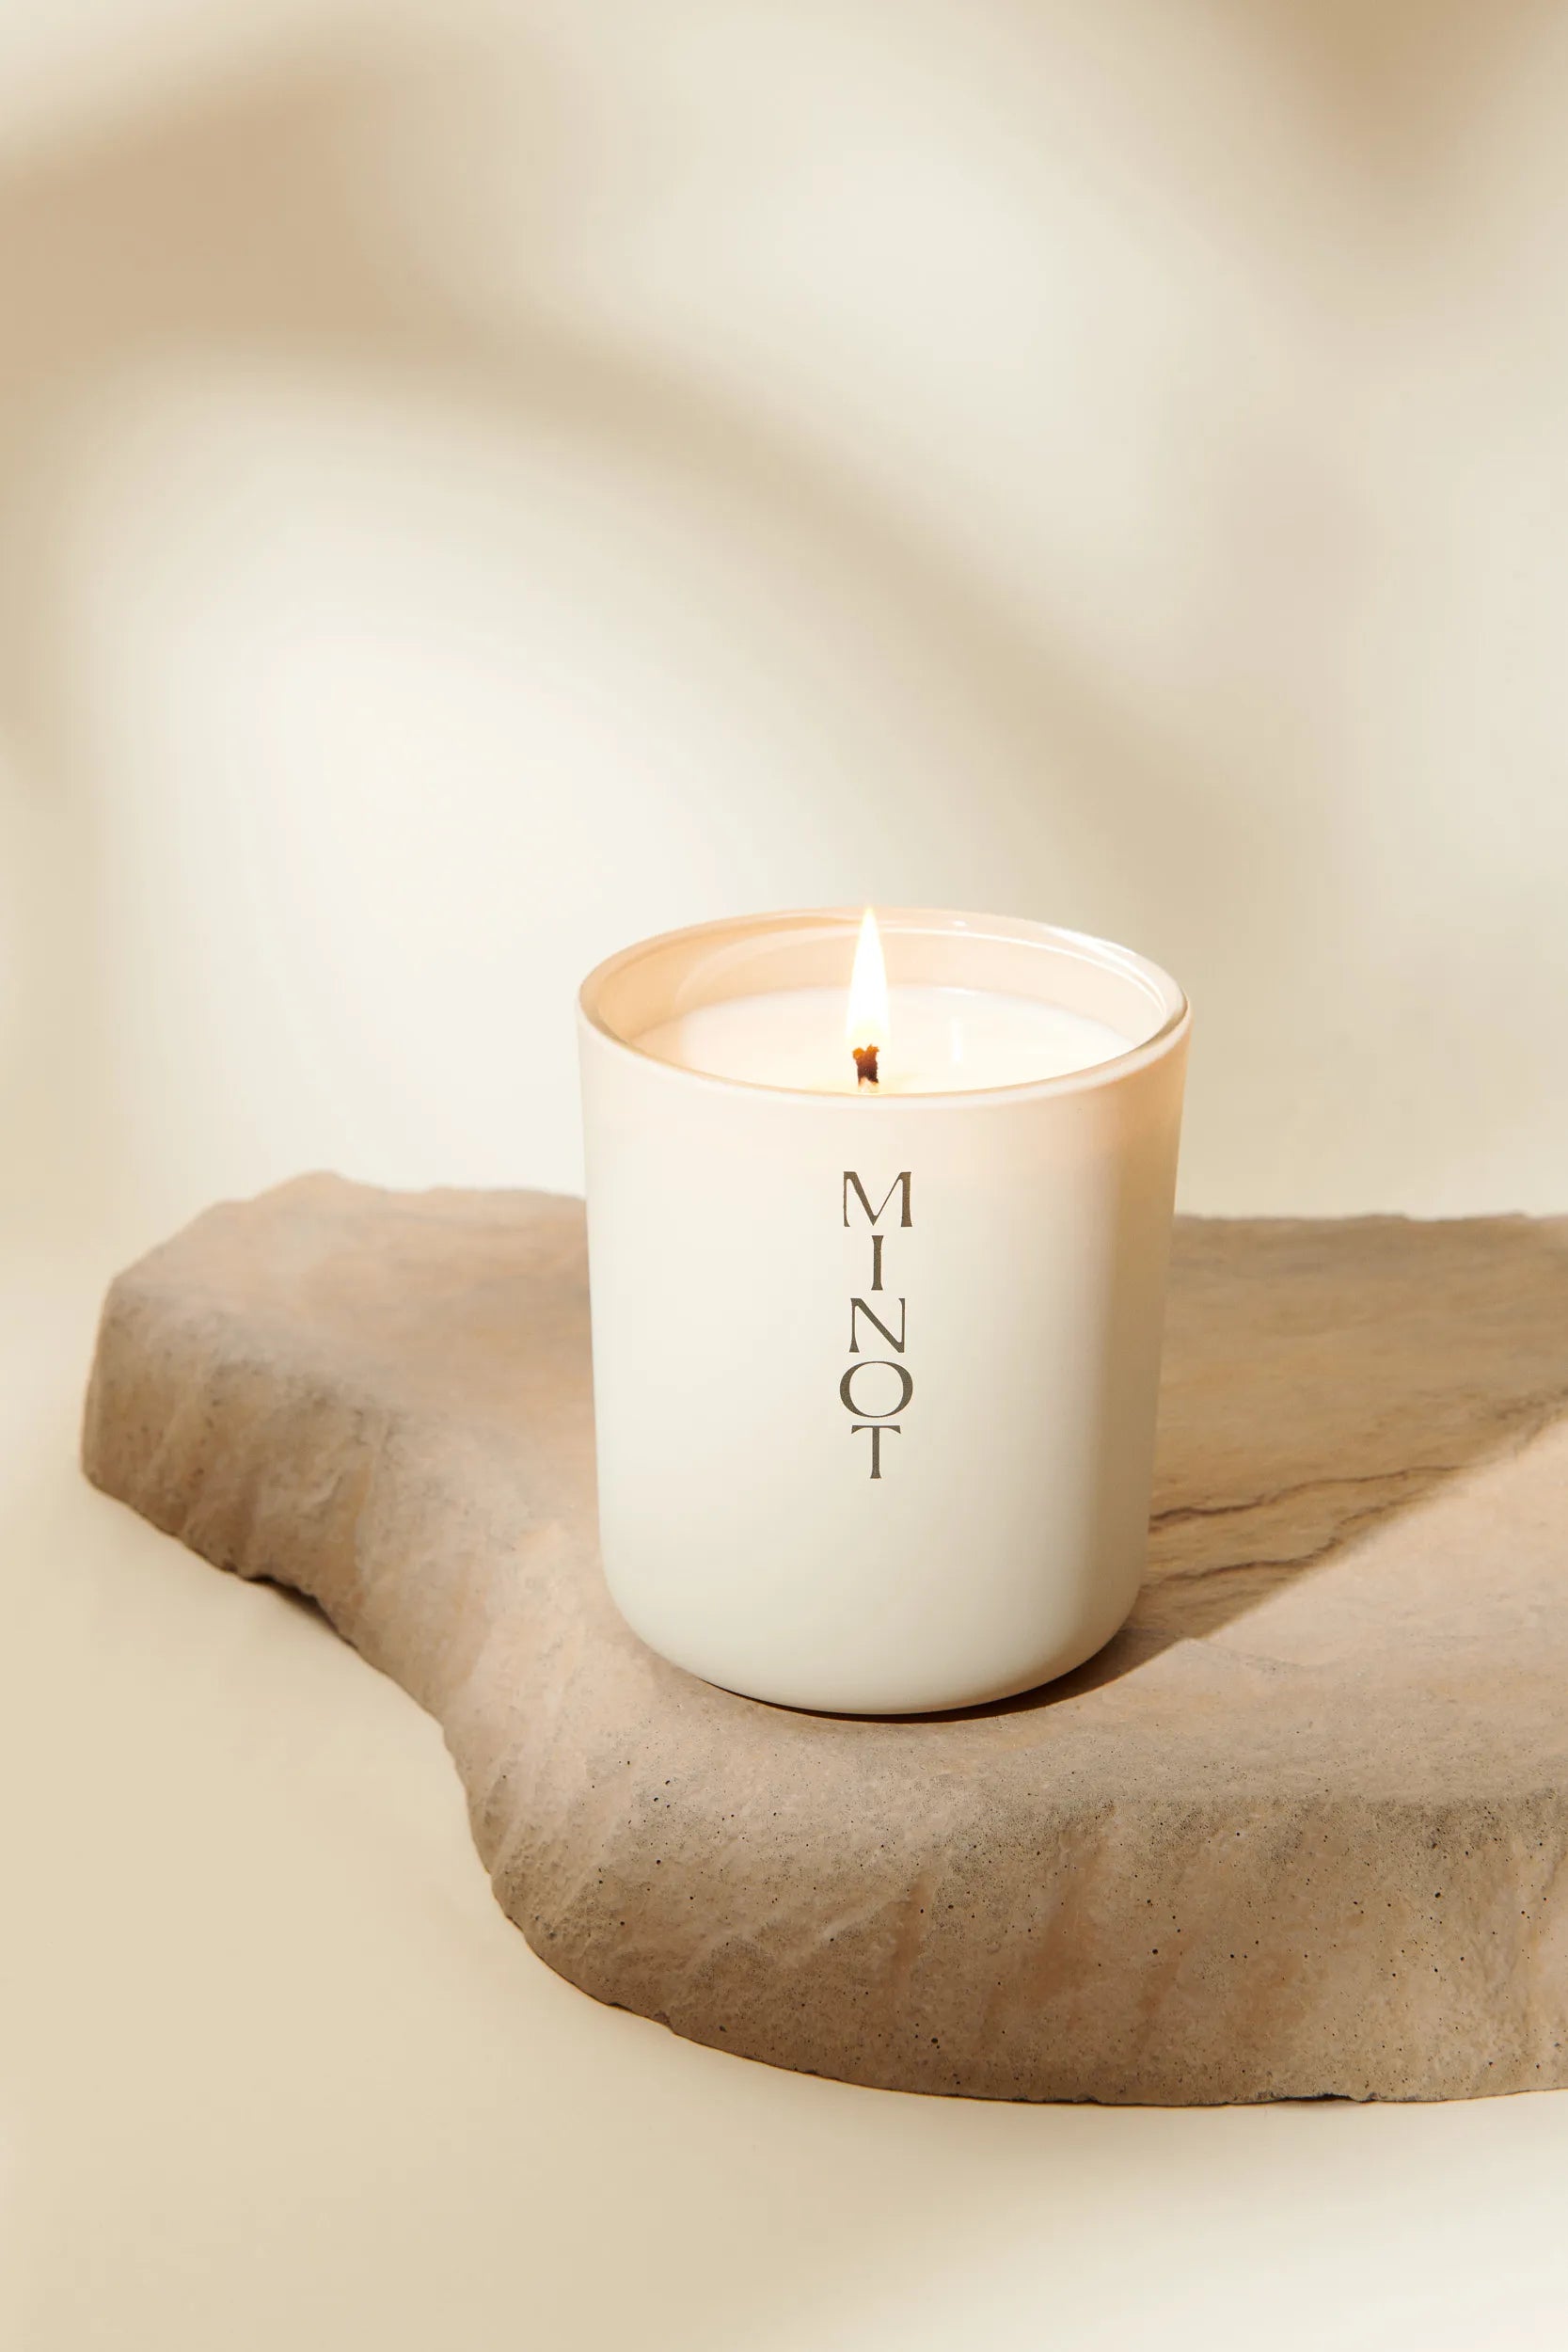 Summit is a clean-burning soy candle with an earthy blend of sage, pine, cedar, and rosemary scents